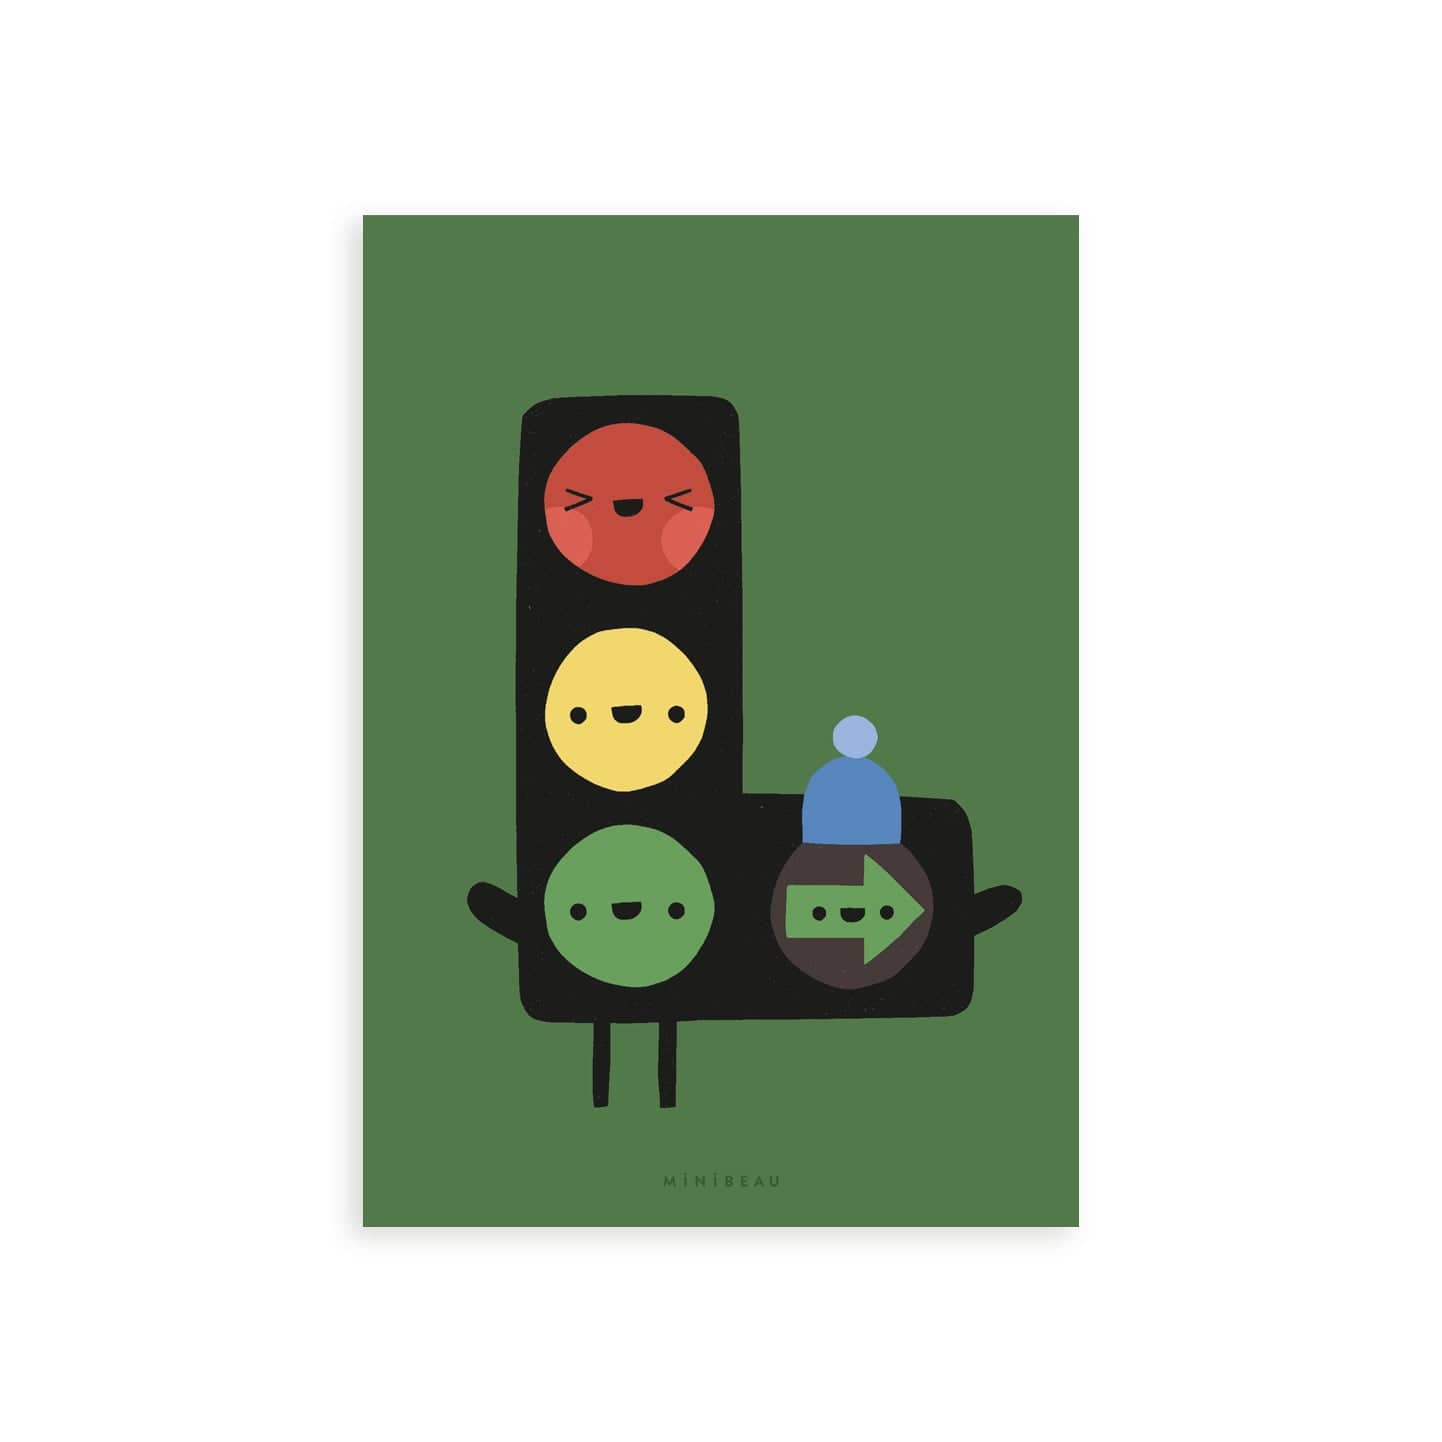 Our Happy Alphabet 'L' Art Print shows filter traffic lights in the shape of an L with a smiling face in each light. The Green Arrow light is wearing a blue woolly hat. All on a dark green background.